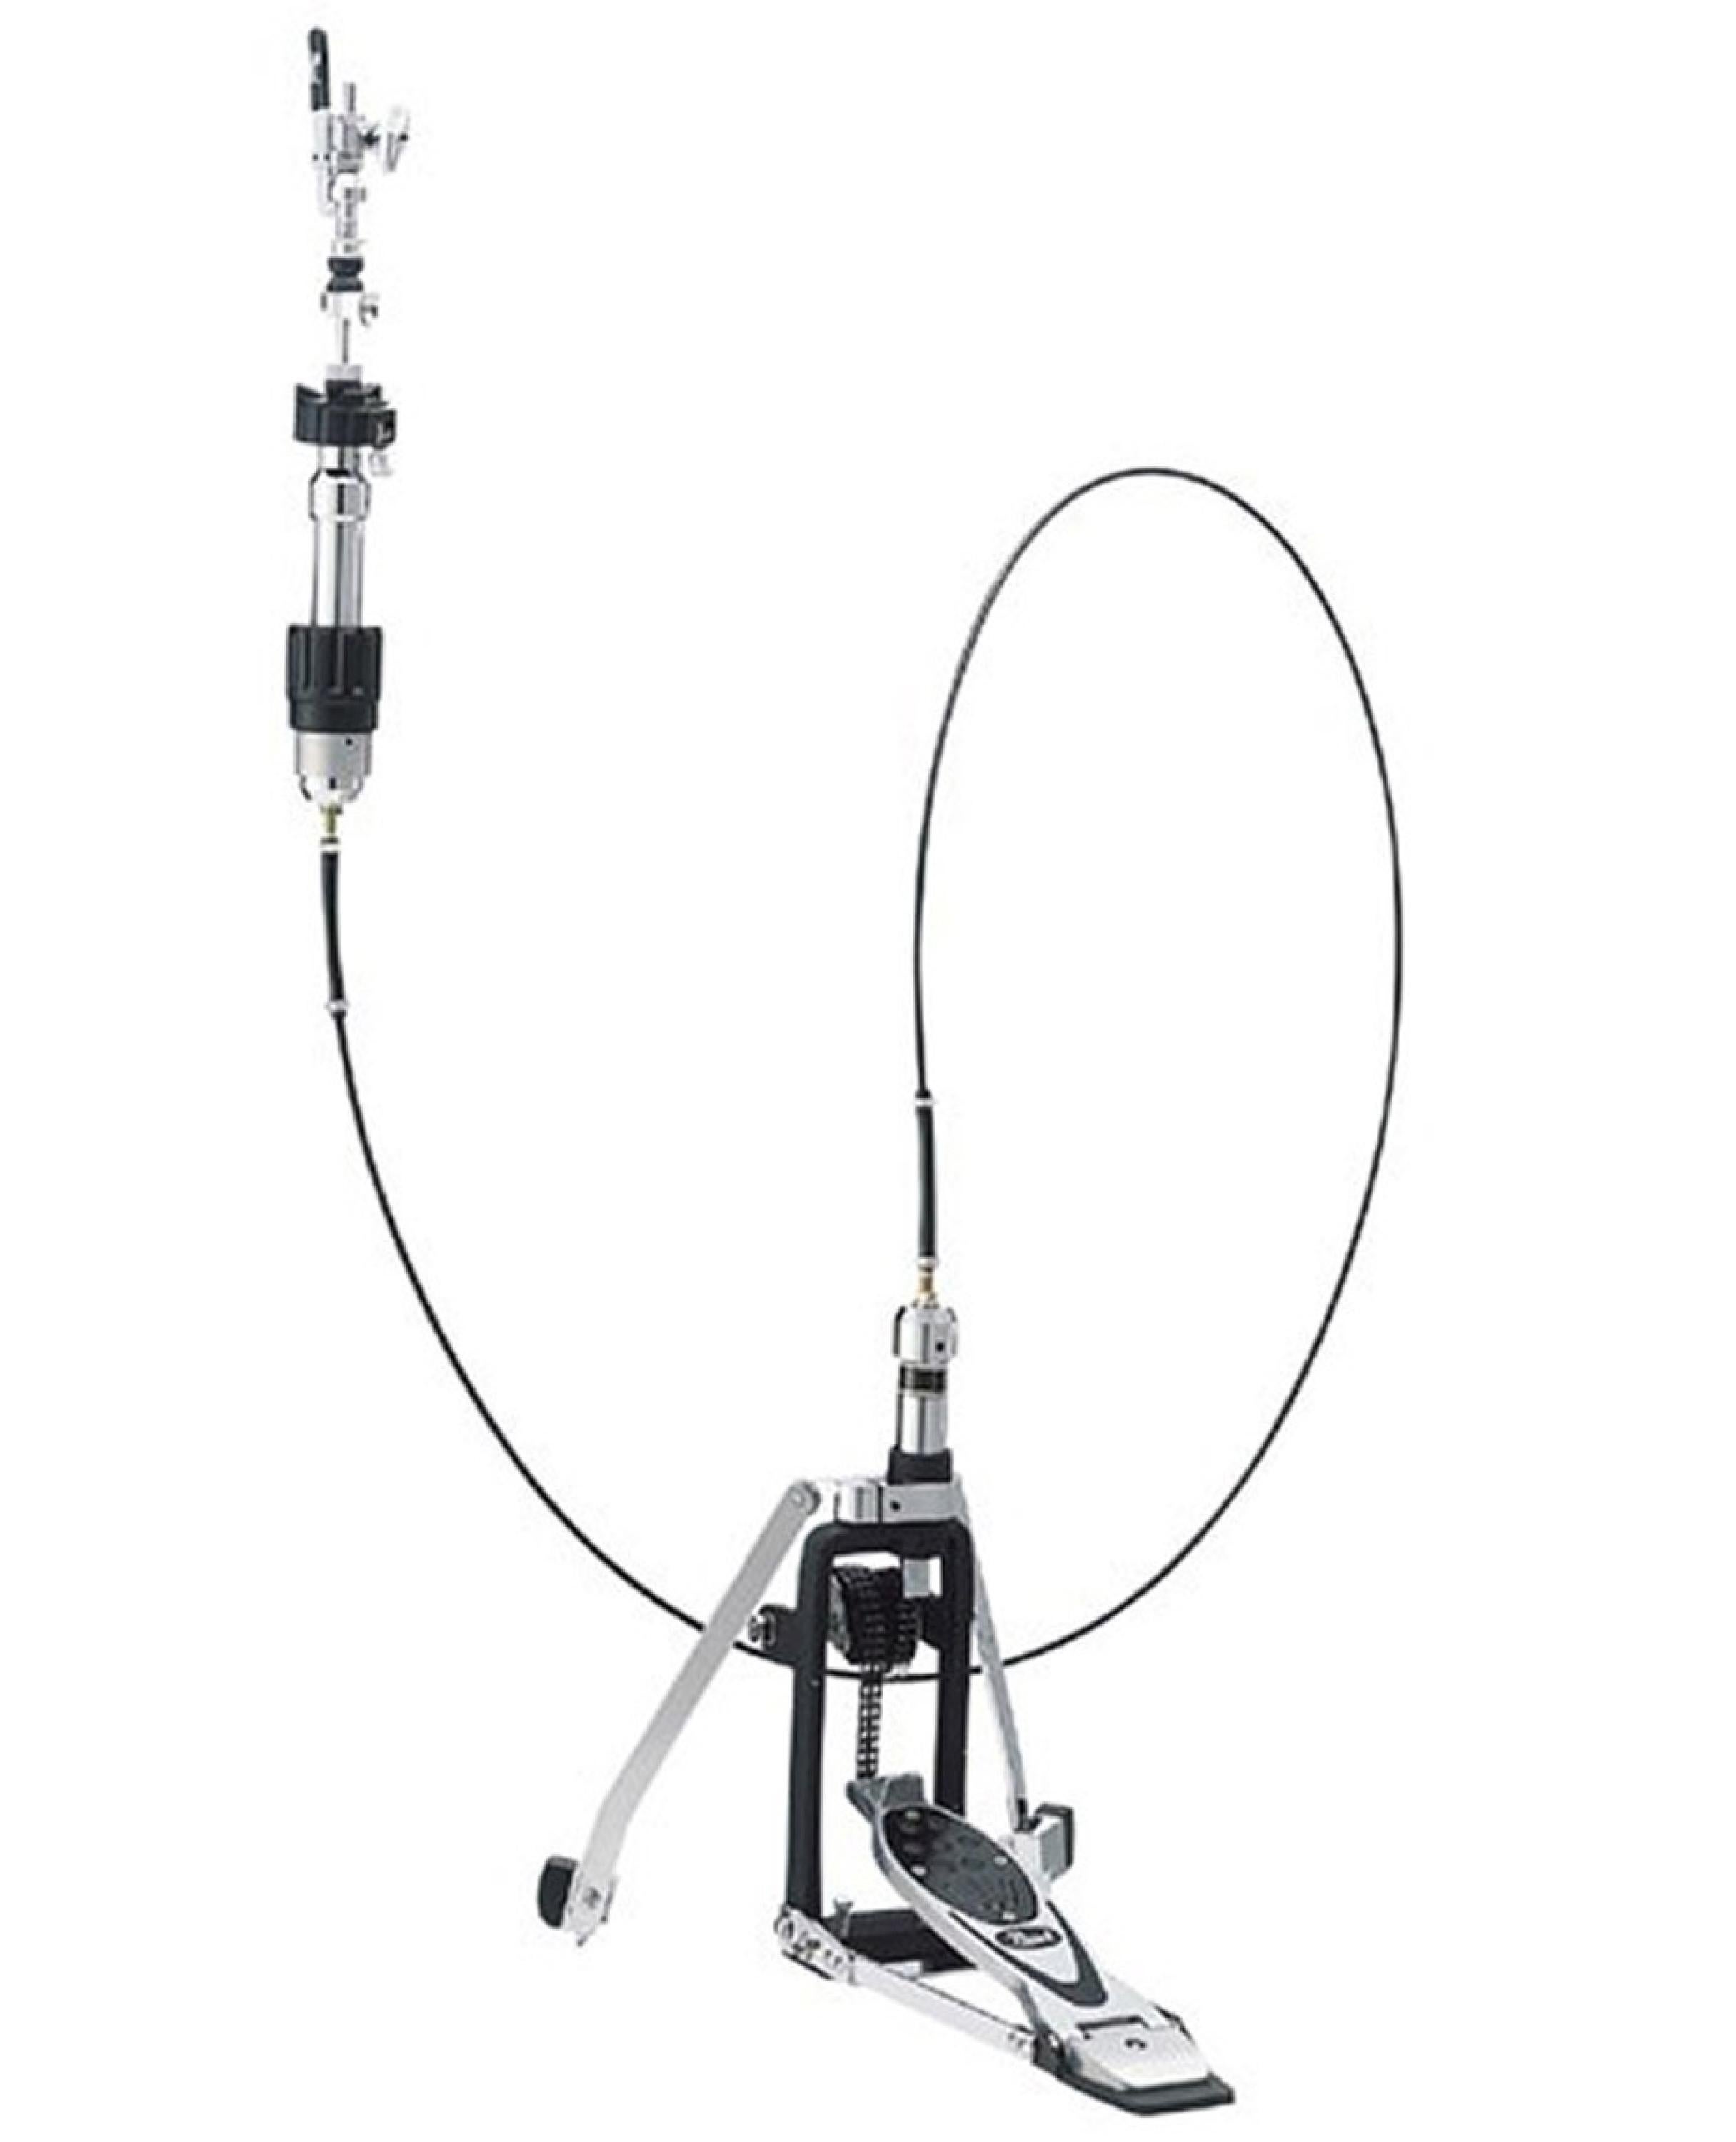 Pearl RH-2000 Eliminator Remote Hi-hat Stand | Sweetwater